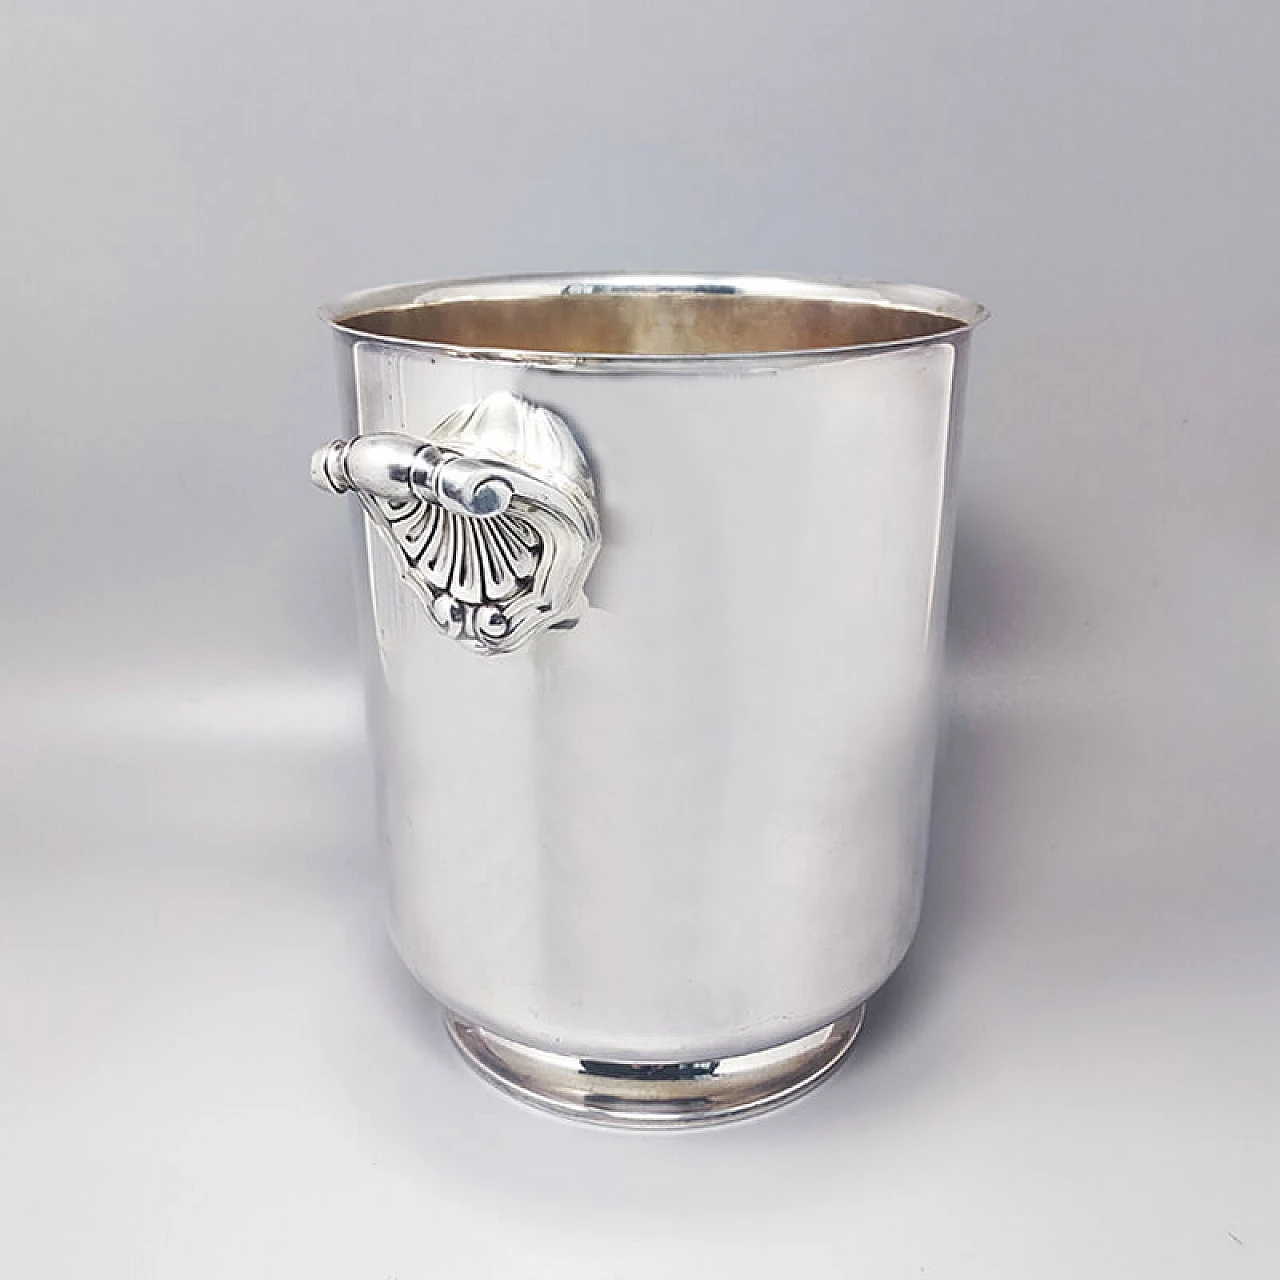 Ormessin silver plated ice bucket by Christofle, 1950s 2